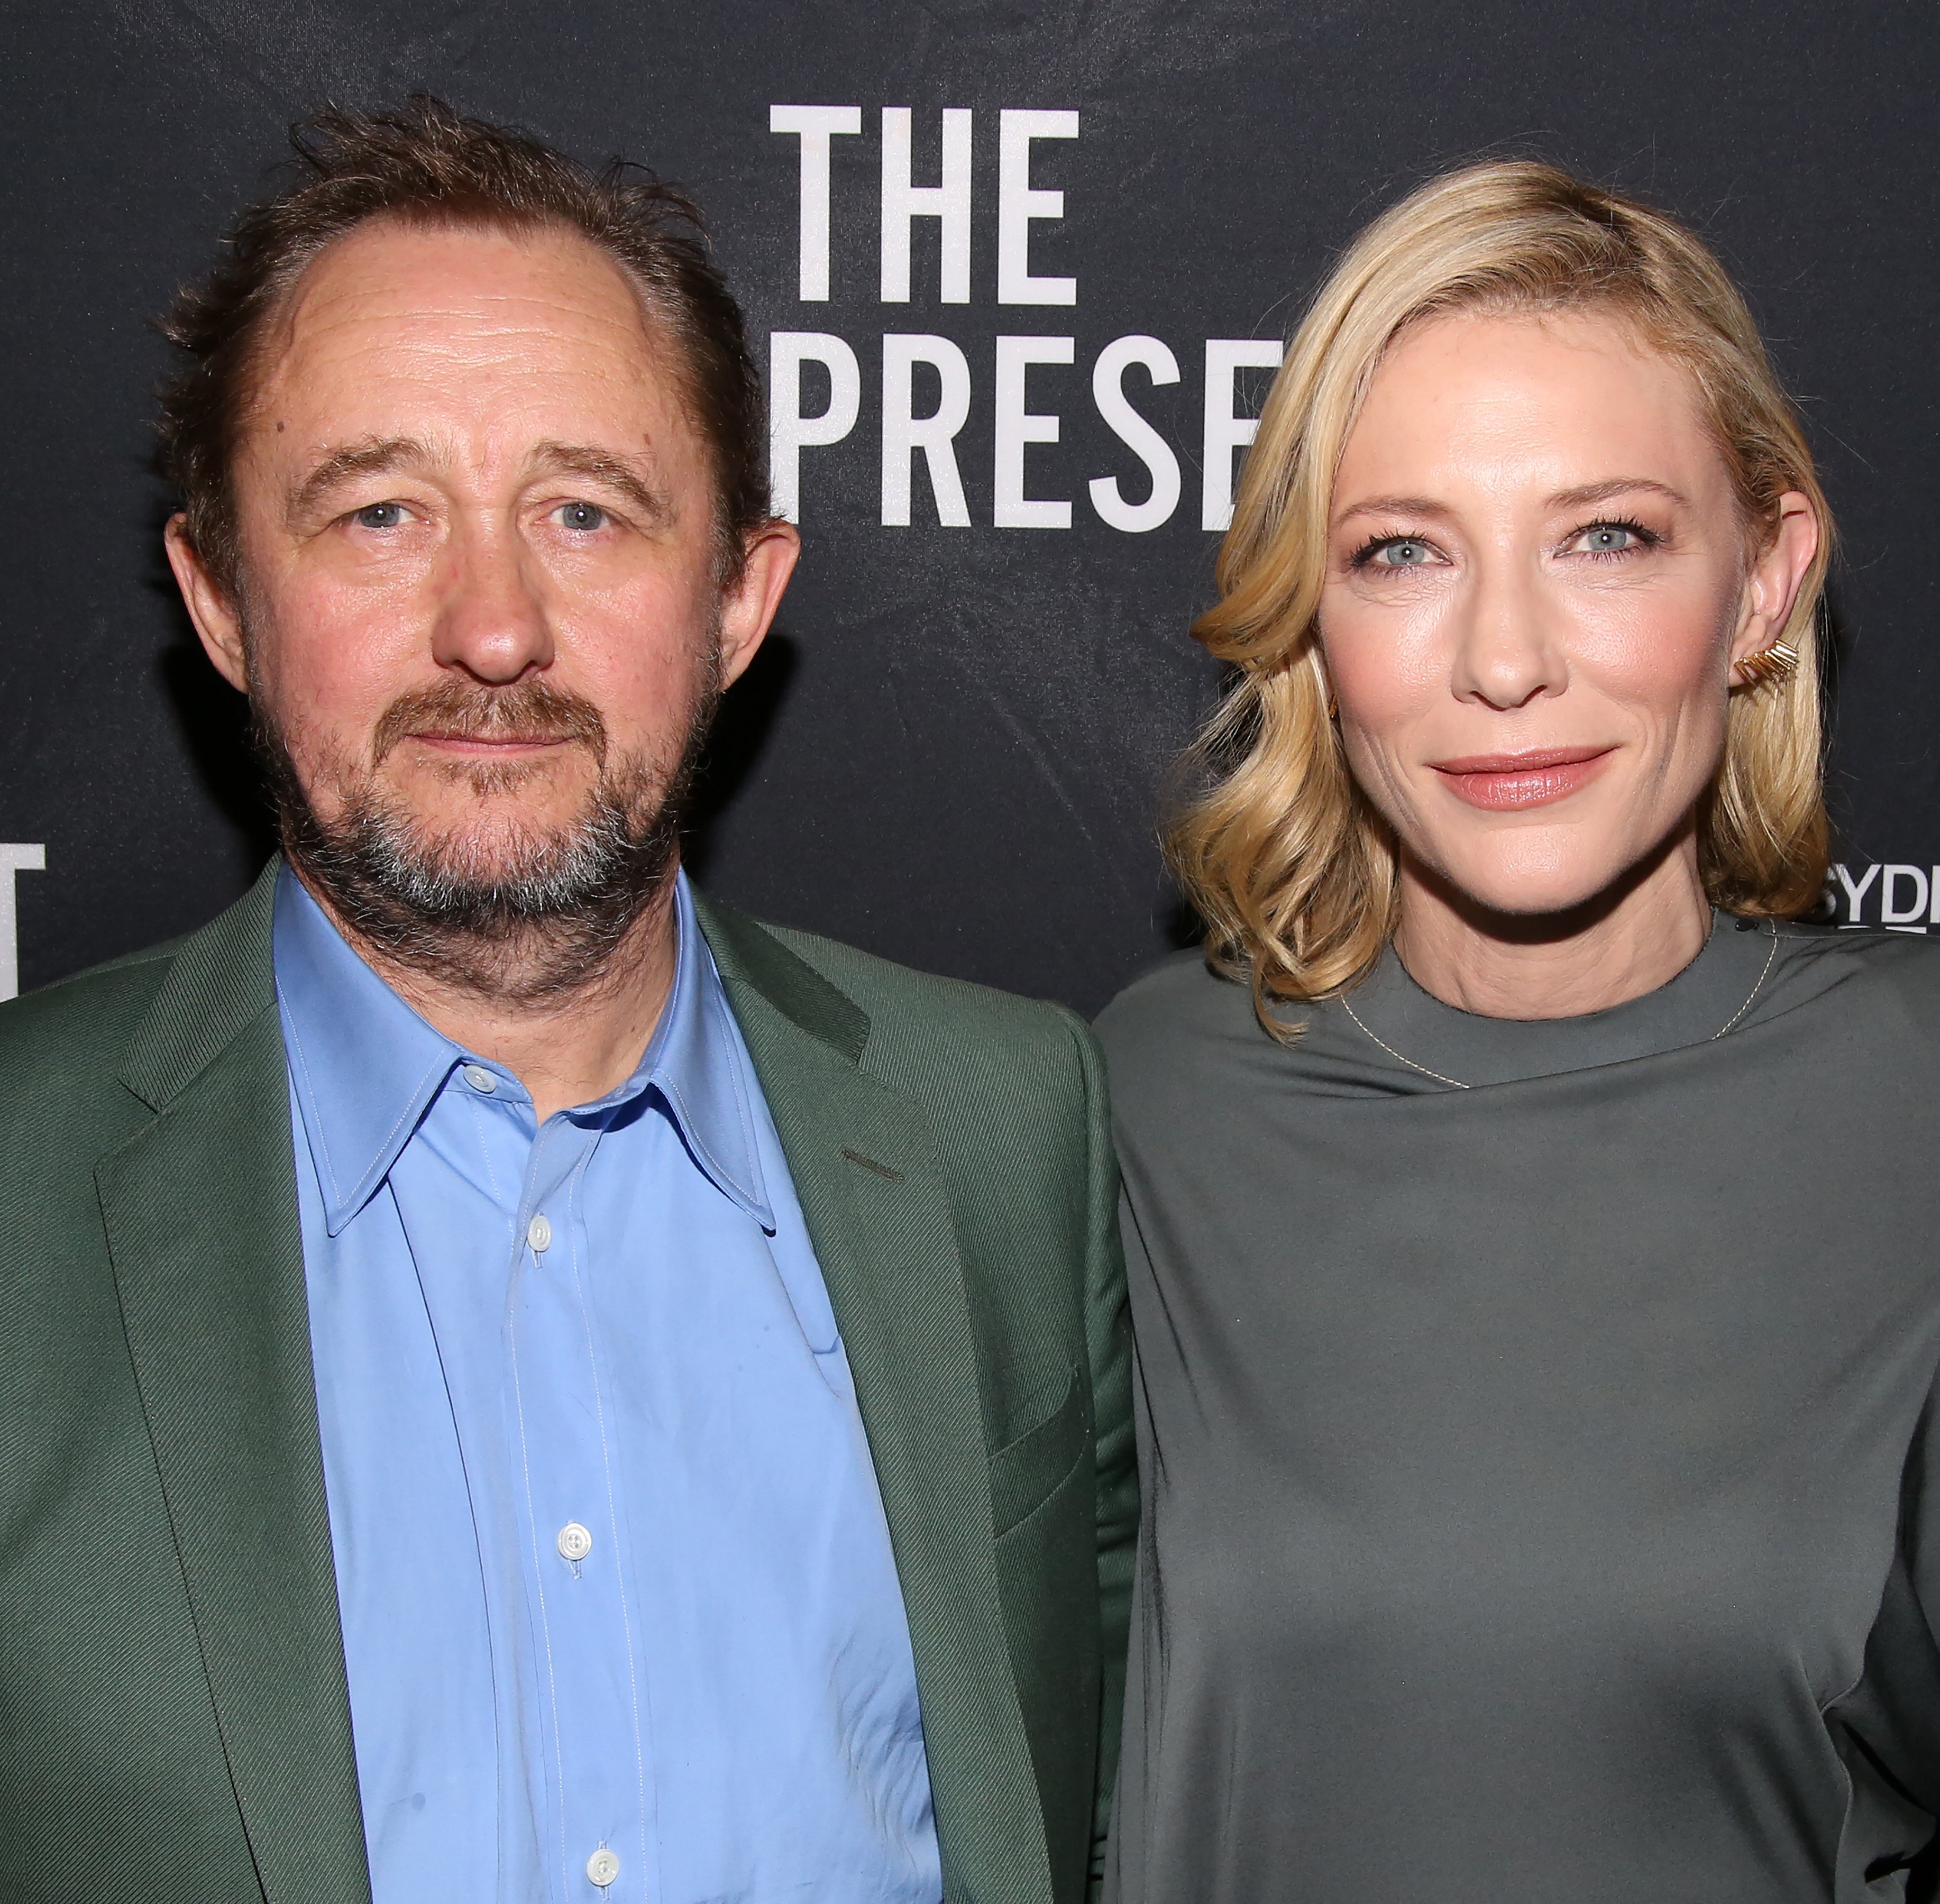 Andrew Upton and his wife, Cate Blanchett, at the Broadway opening Night of "The Present" at the Bryant Park Grill, NYC on January 8, 2017. | Source: Getty Images